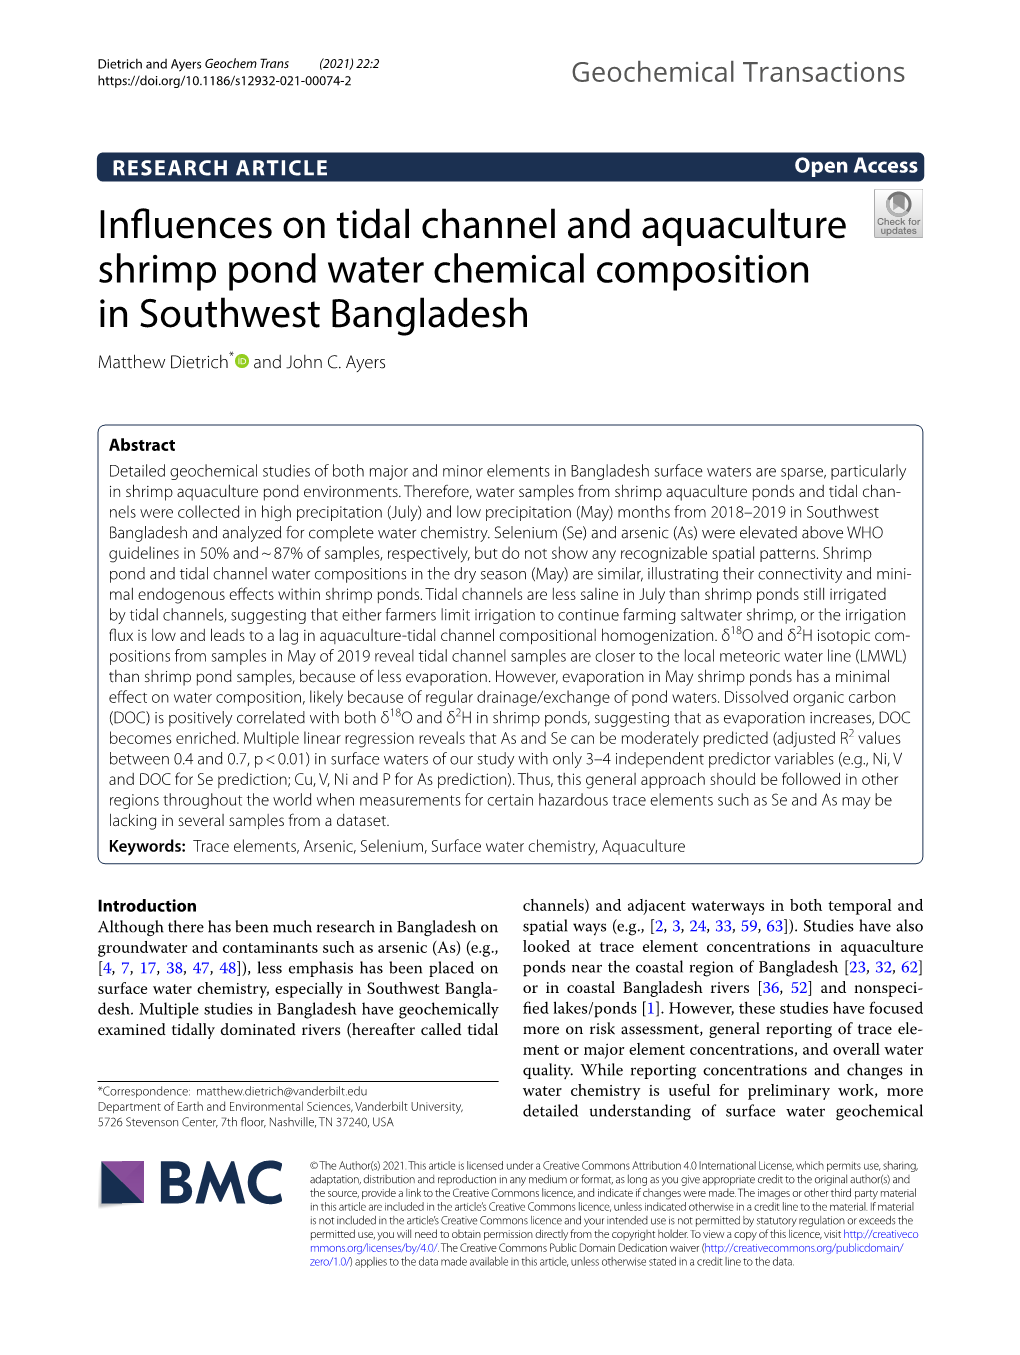 Influences on Tidal Channel and Aquaculture Shrimp Pond Water